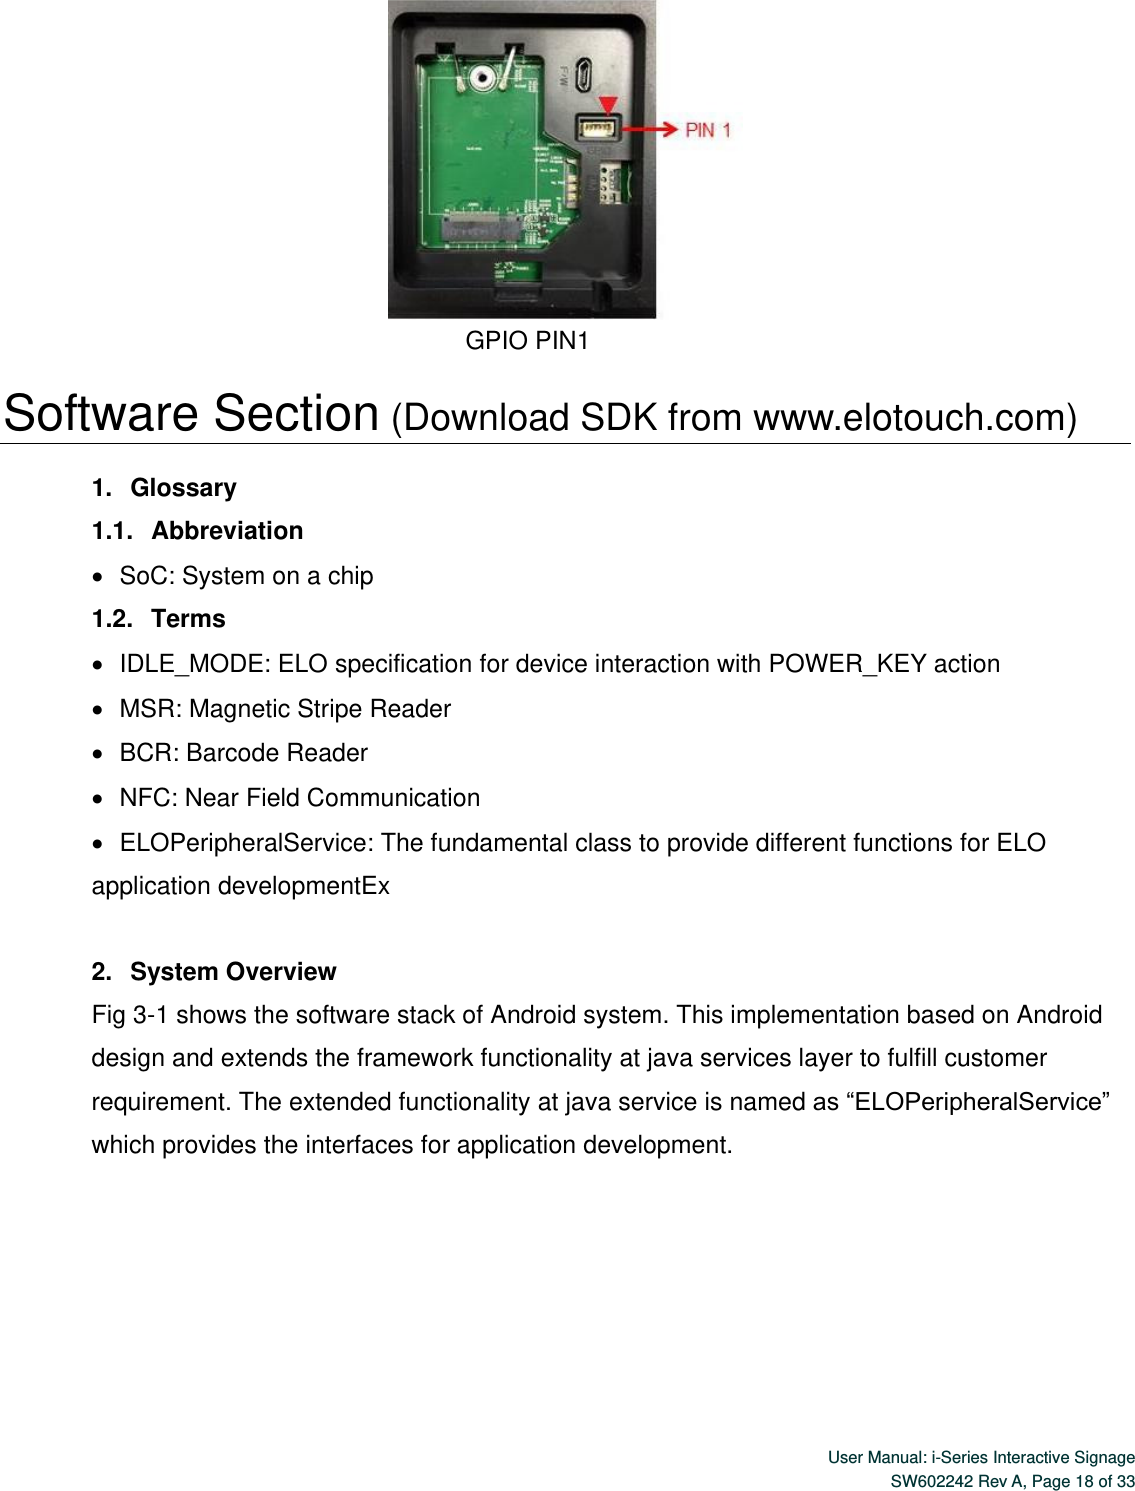  User Manual: i-Series Interactive Signage SW602242 Rev A, Page 18 of 33                                         GPIO PIN1  Software Section (Download SDK from www.elotouch.com)  1.   Glossary 1.1.   Abbreviation    SoC: System on a chip 1.2.   Terms    IDLE_MODE: ELO specification for device interaction with POWER_KEY action    MSR: Magnetic Stripe Reader    BCR: Barcode Reader    NFC: Near Field Communication    ELOPeripheralService: The fundamental class to provide different functions for ELO application developmentEx  2.   System Overview Fig 3-1 shows the software stack of Android system. This implementation based on Android design and extends the framework functionality at java services layer to fulfill customer requirement. The extended functionality at java service is named as “ELOPeripheralService” which provides the interfaces for application development. 